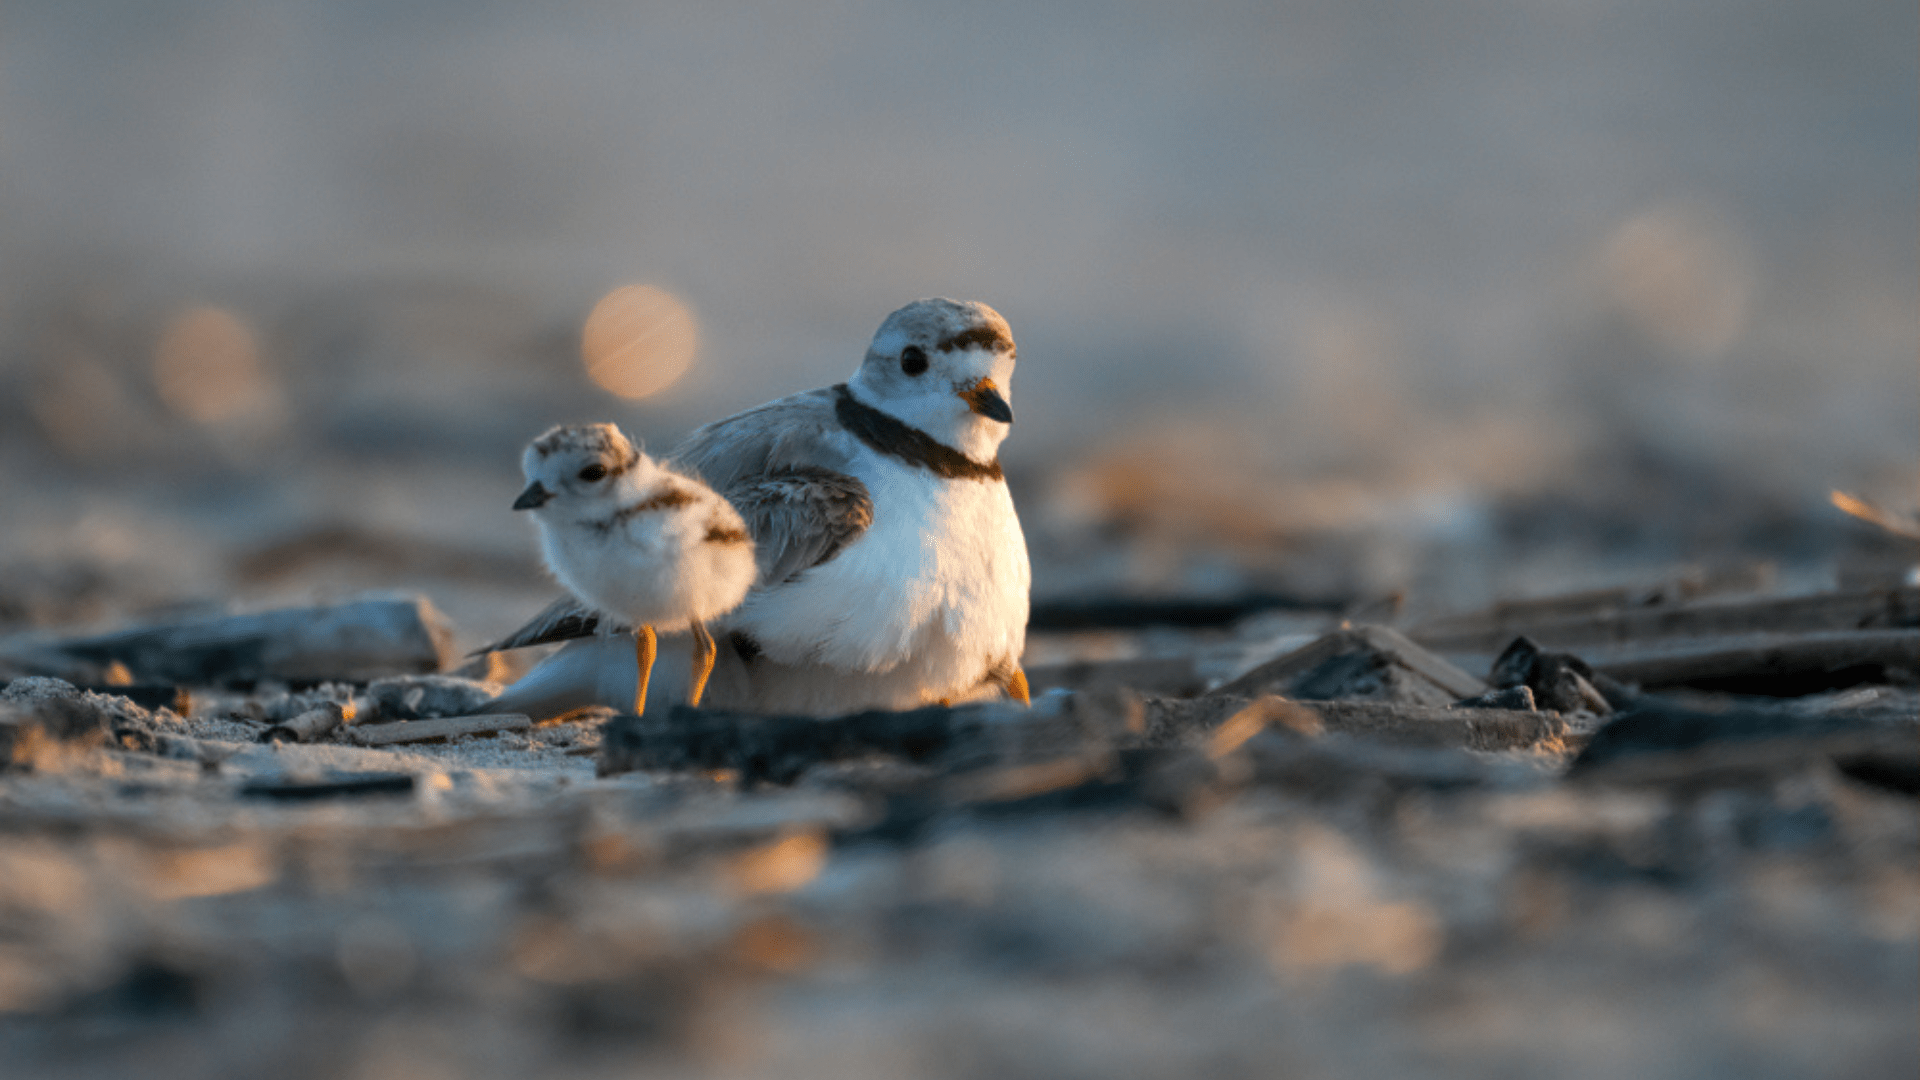 A Piping Plover adult and chick sit on the beach close together.